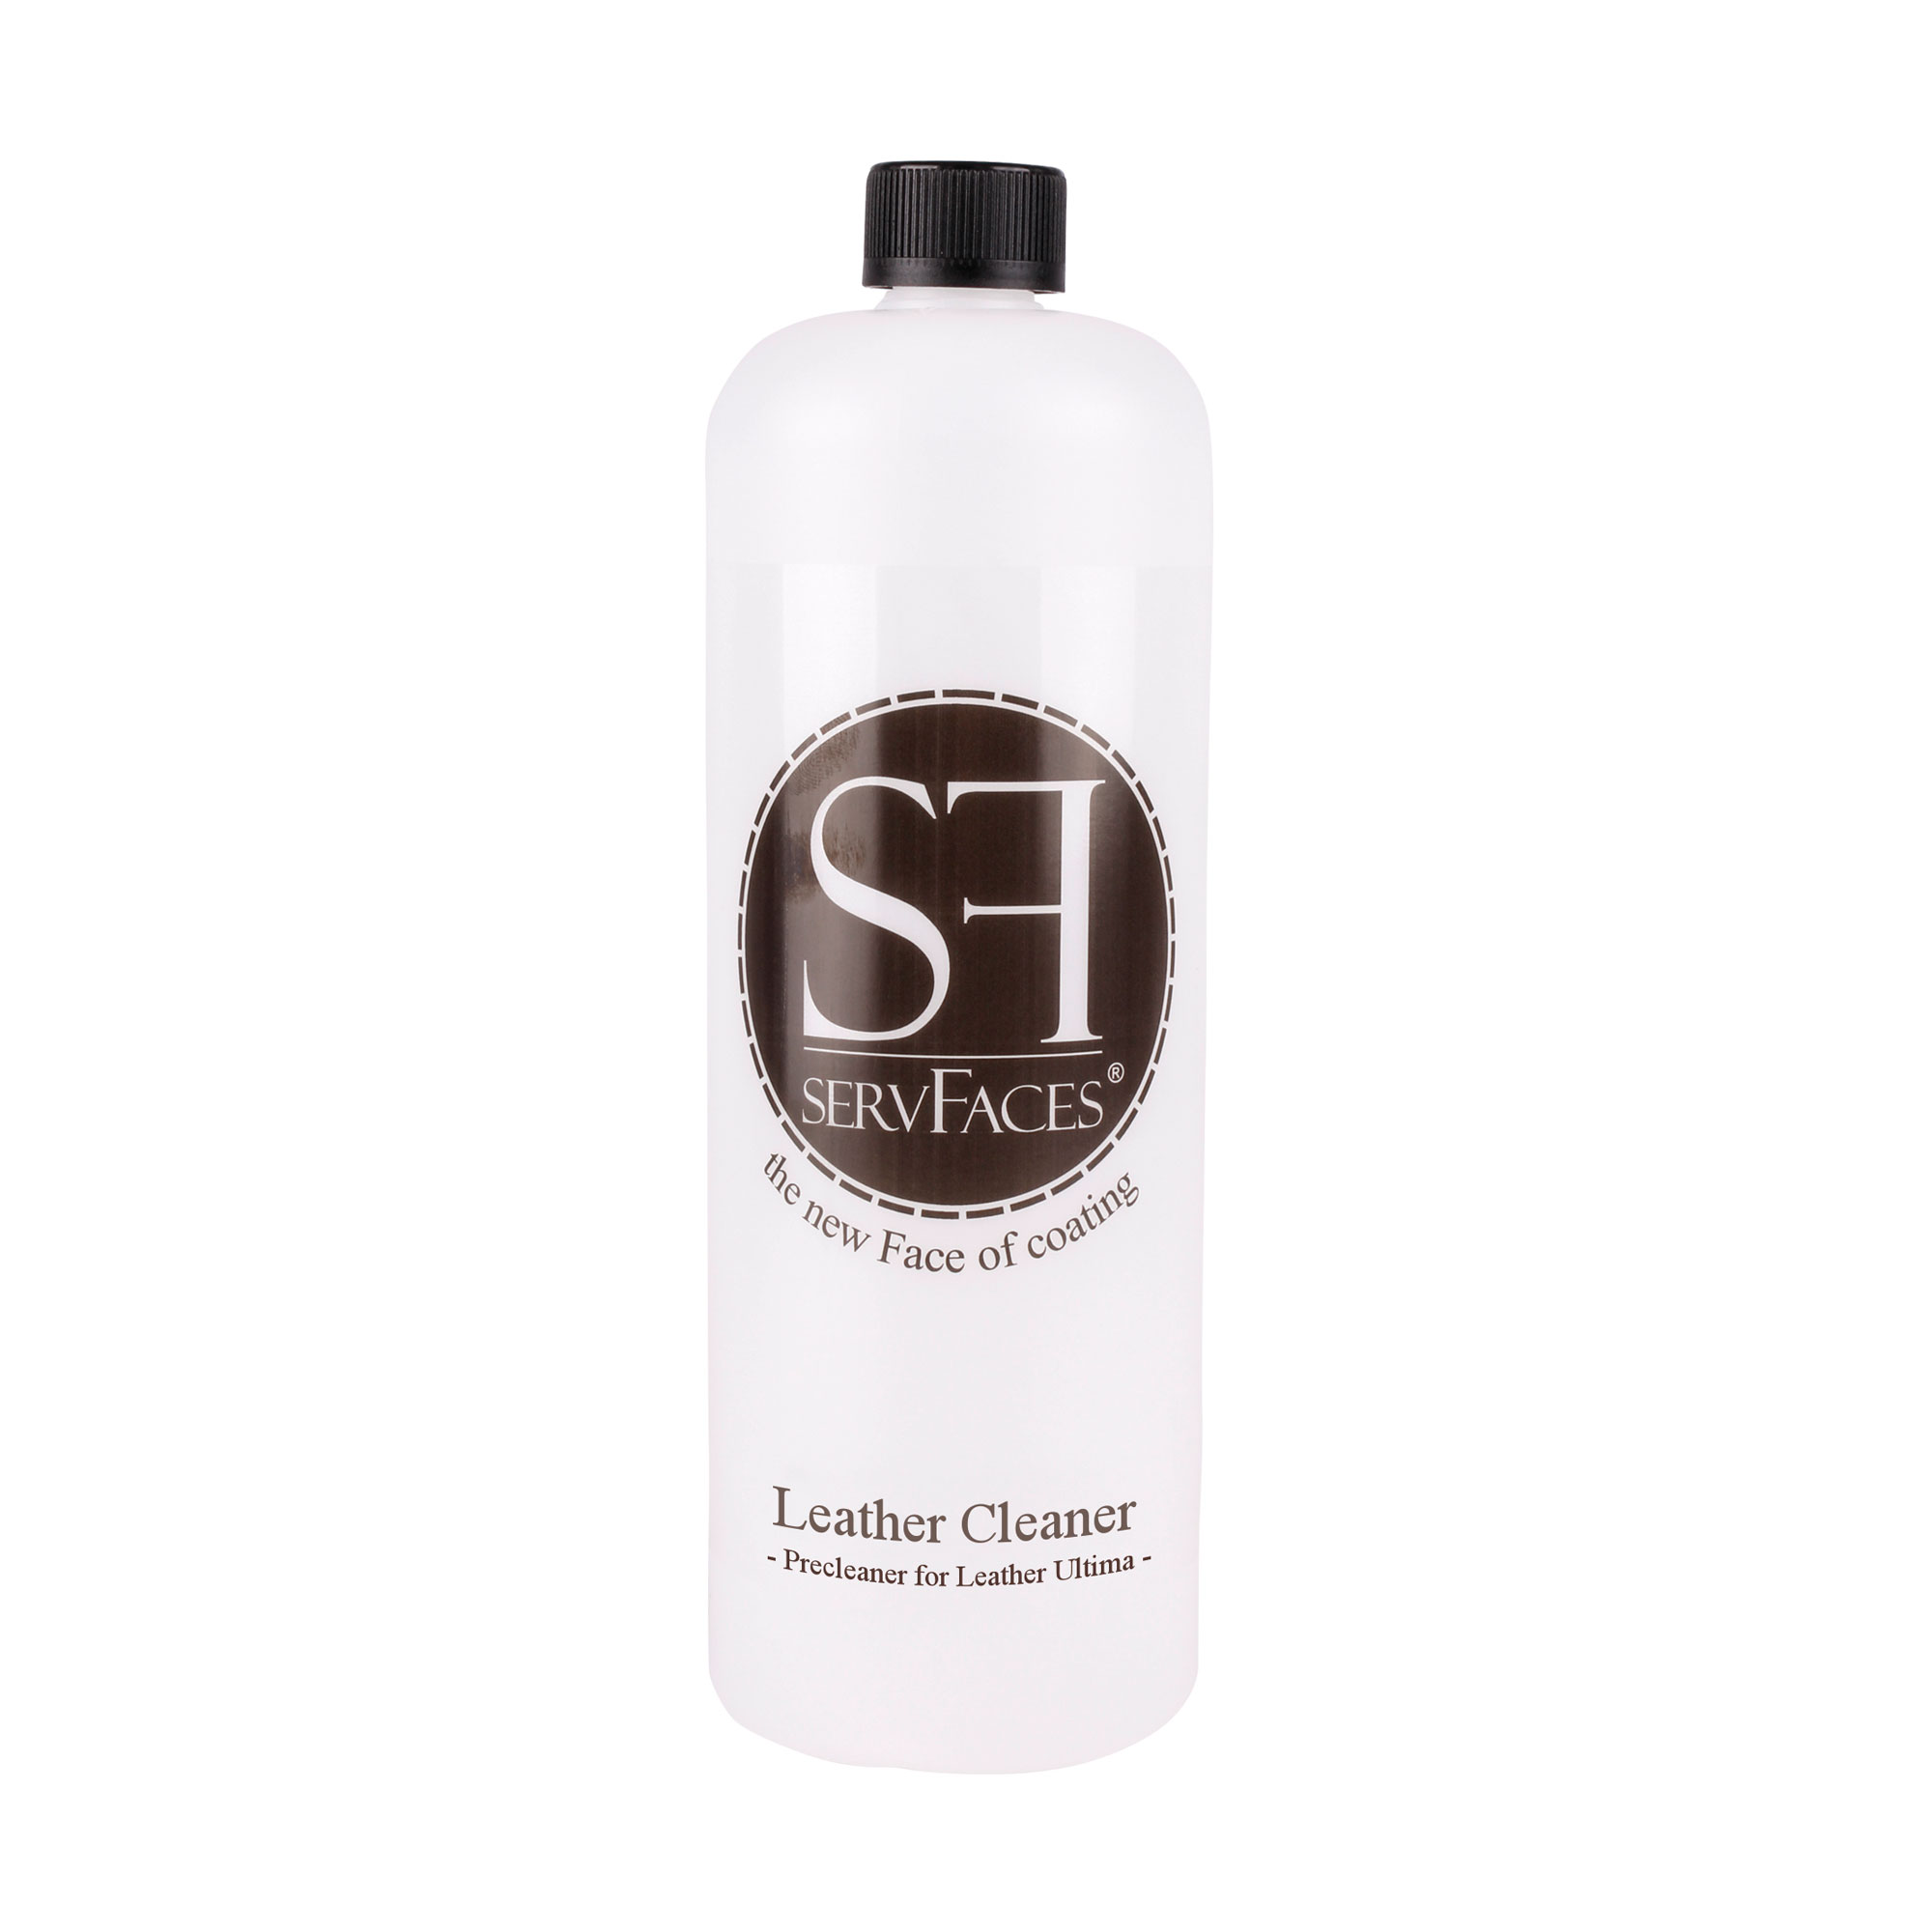 servFaces Leather Cleaner